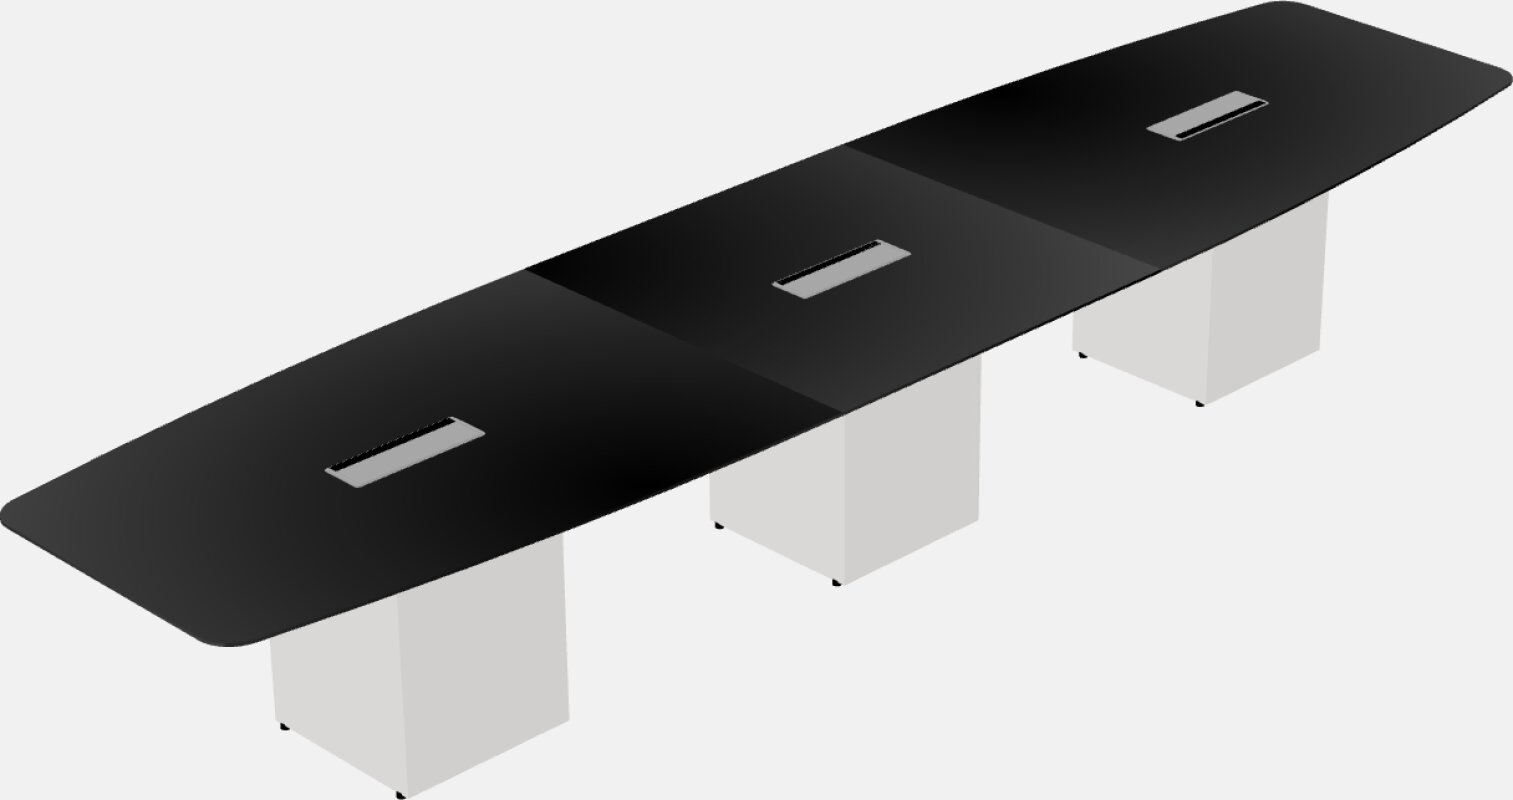 Boat-shaped meeting table